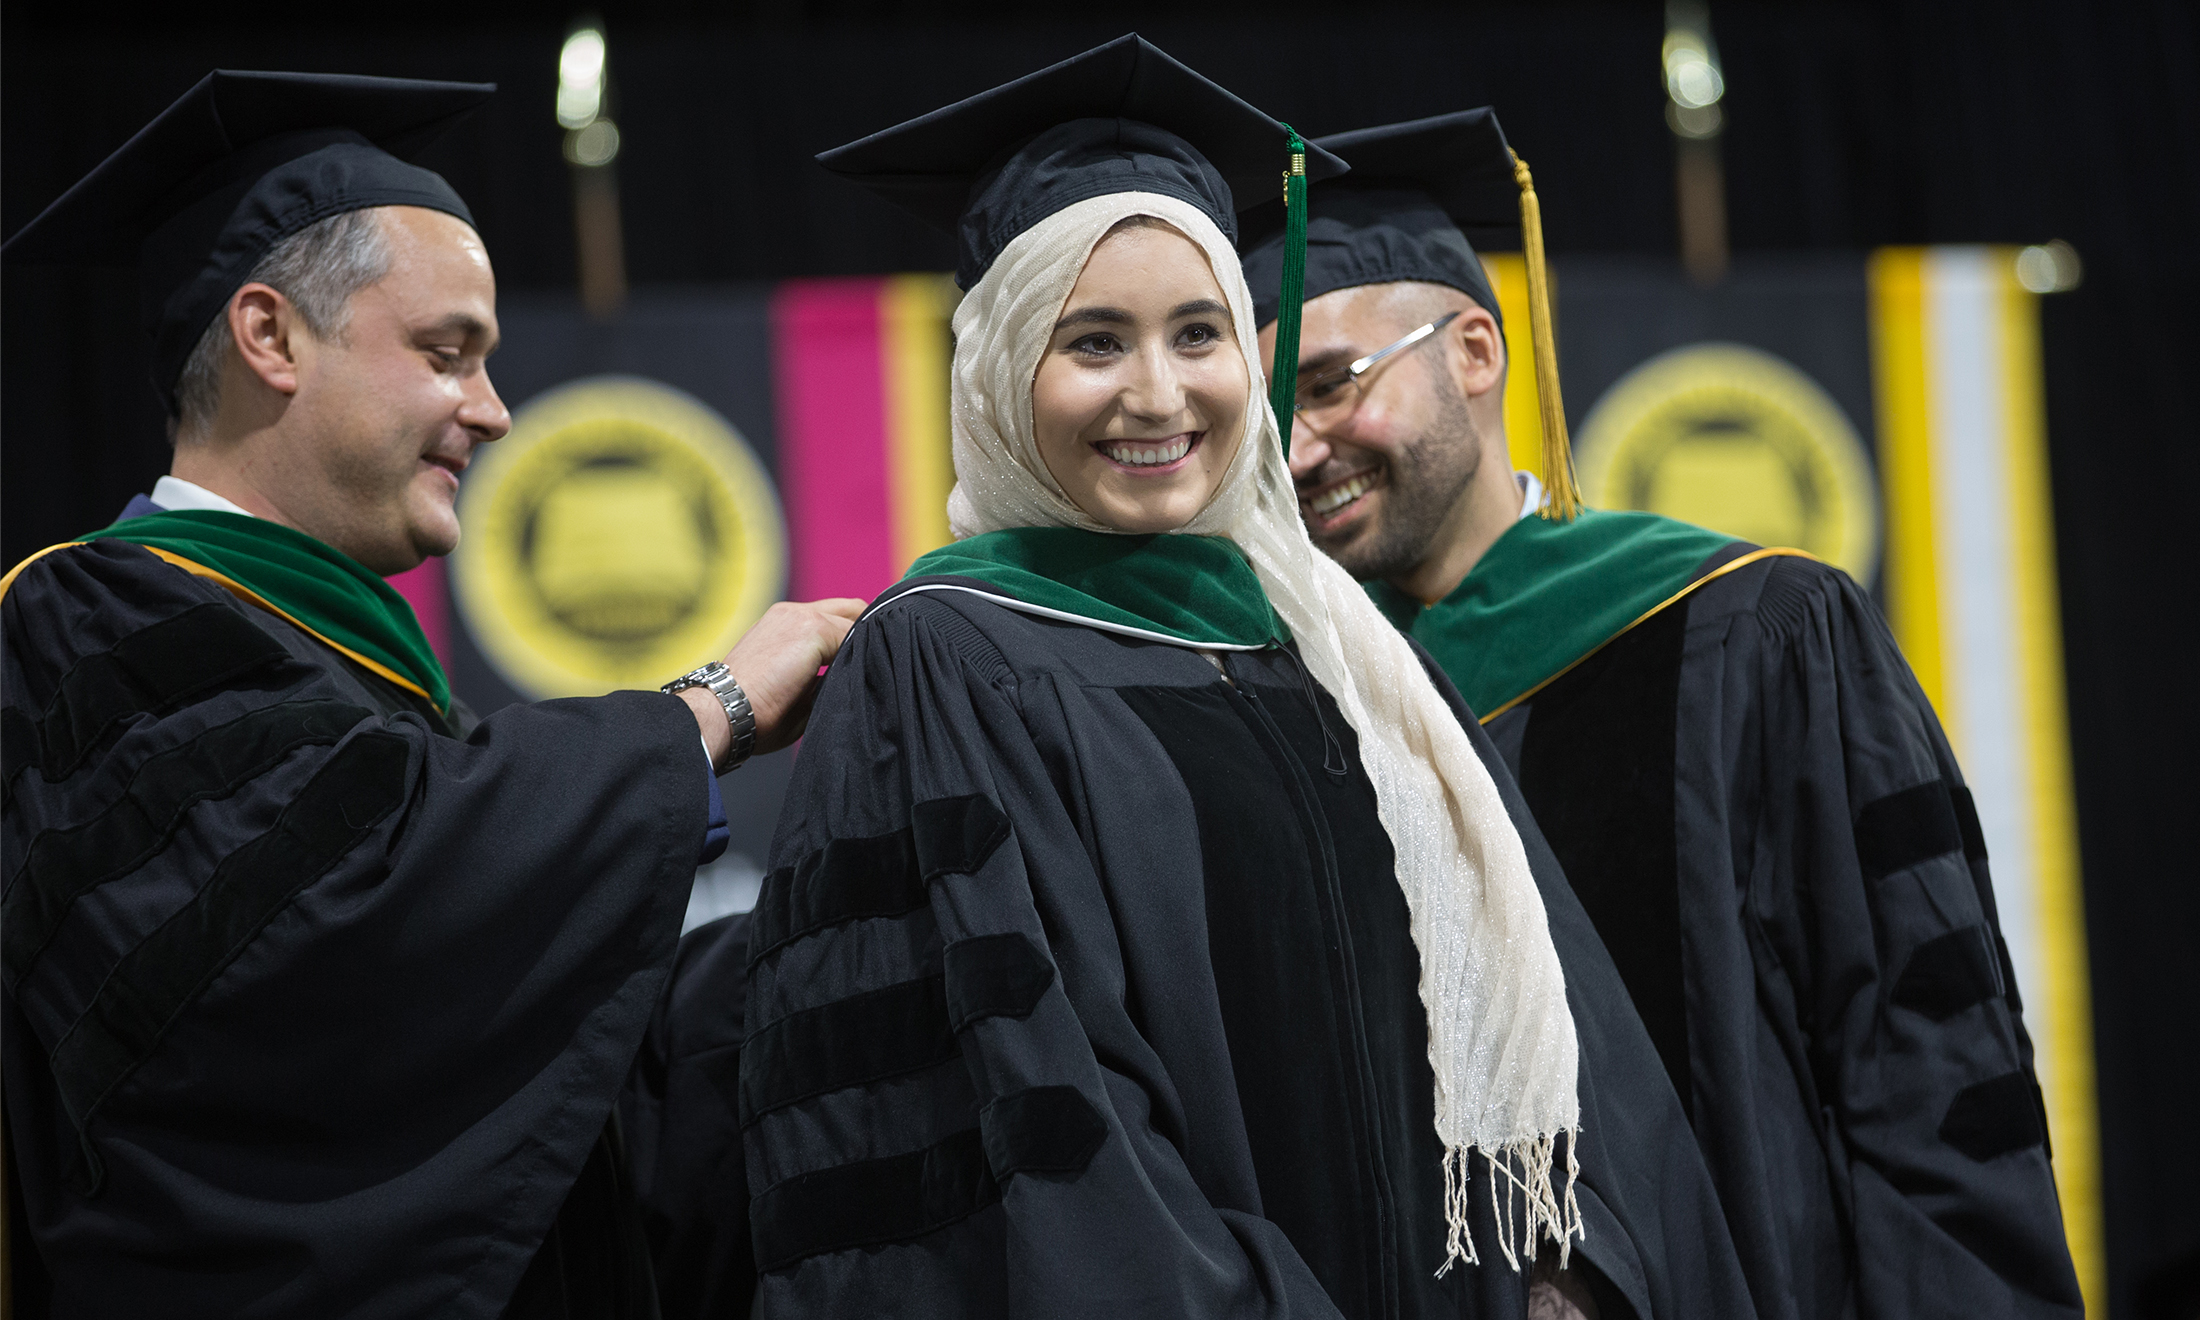 OUWB alumnae Fatima Fahs, M.D. at her commencement